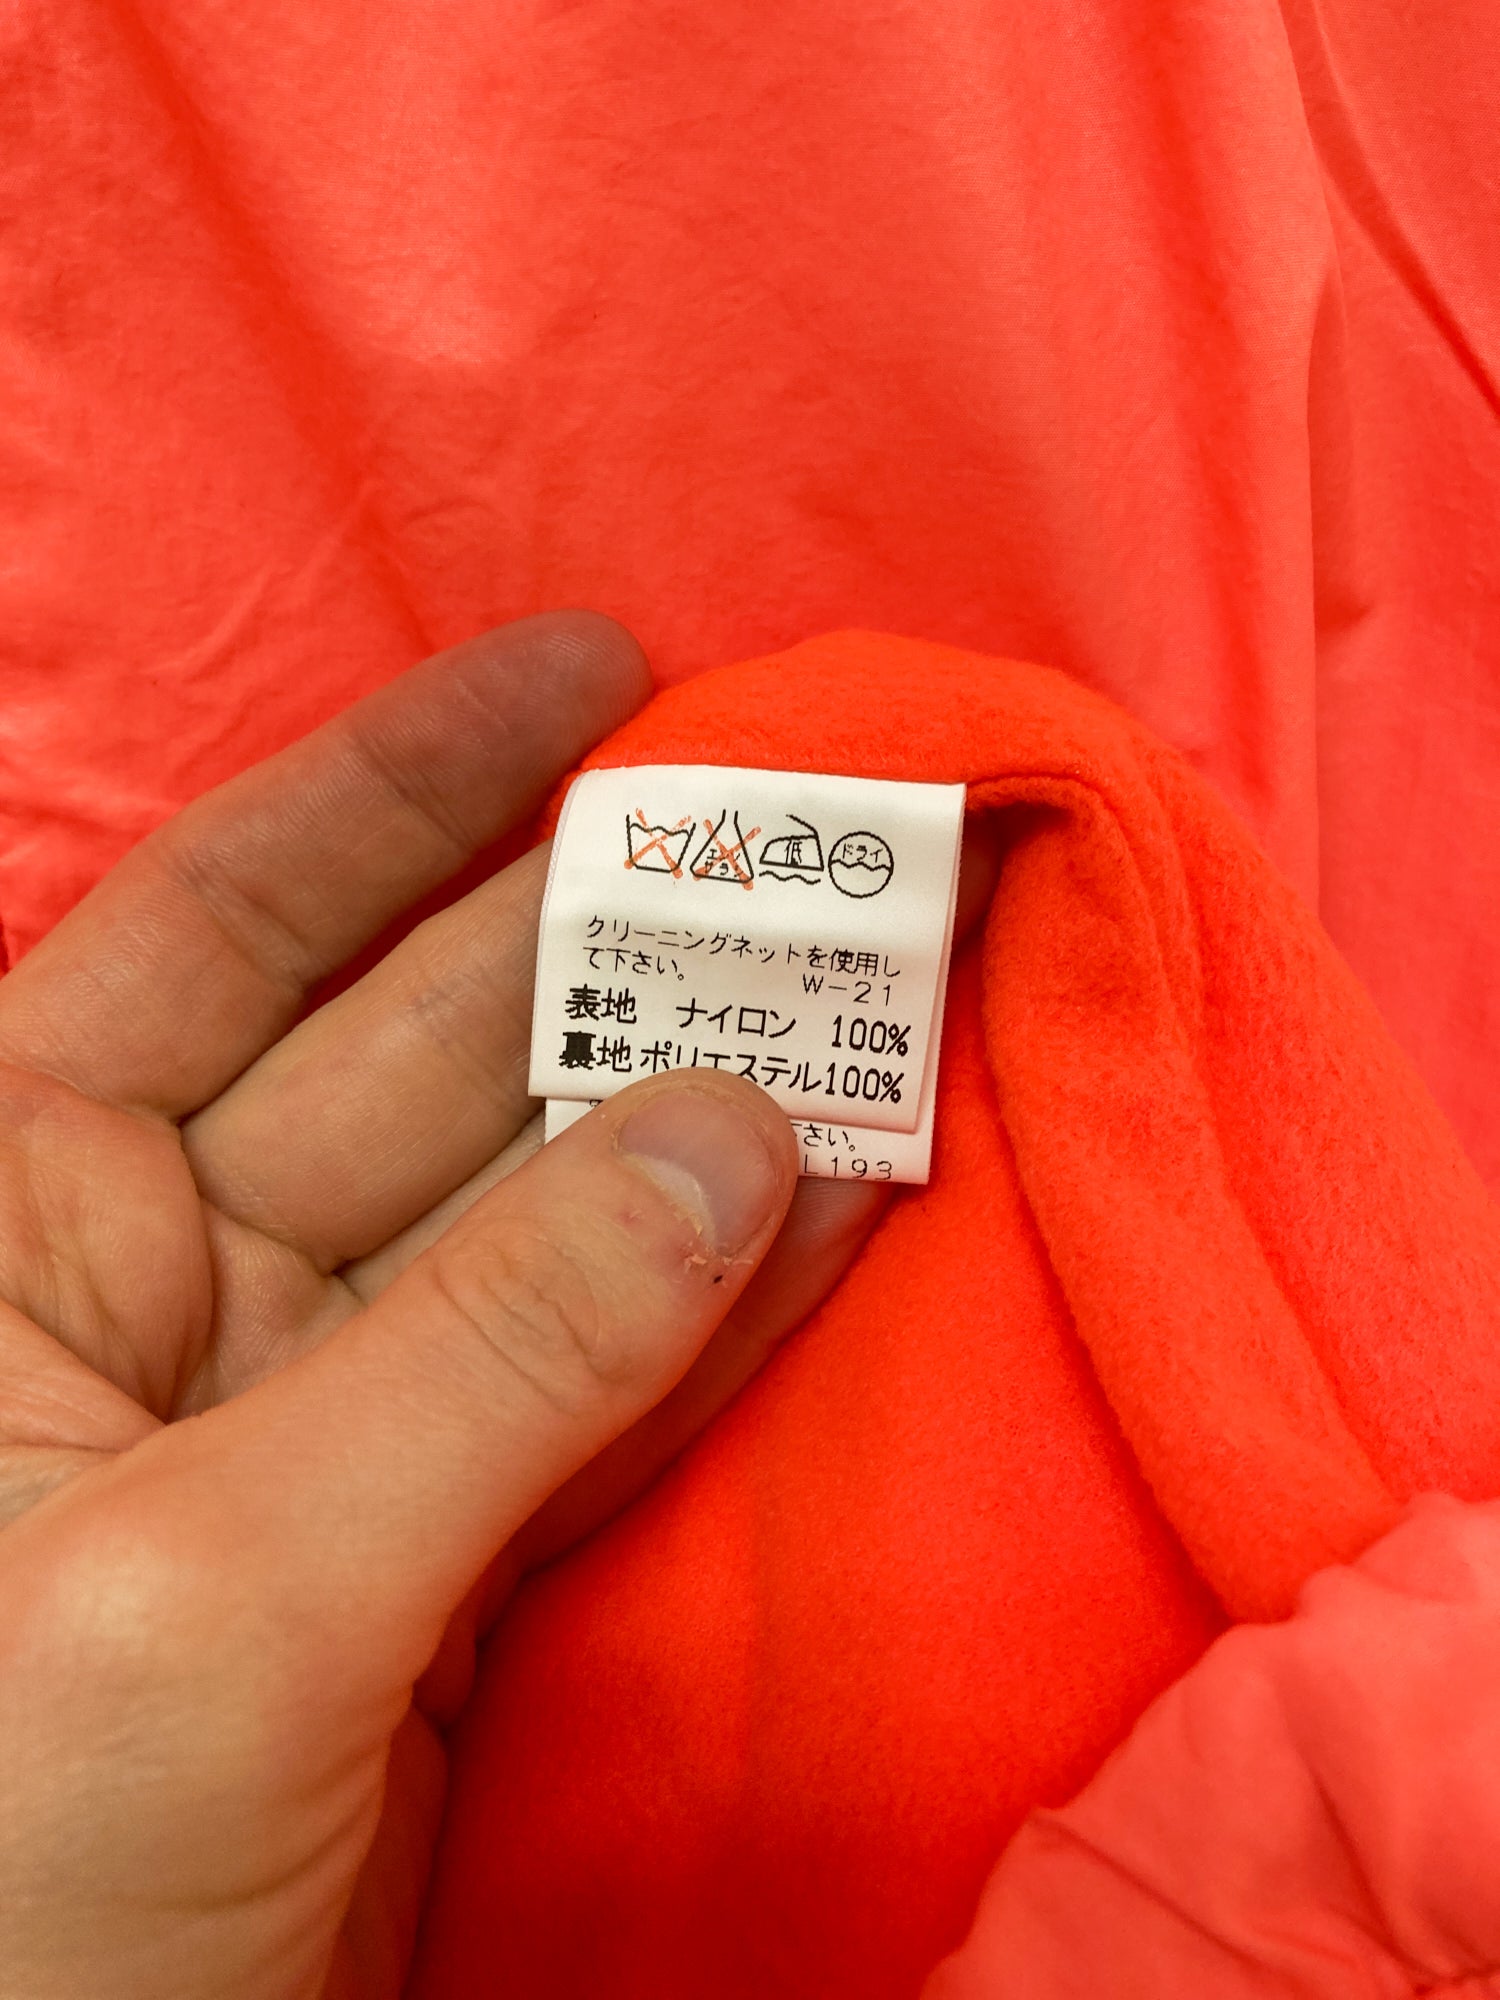 Zucca AW1999-2000 'the year of climax' fluorescent orange pullover - size M S